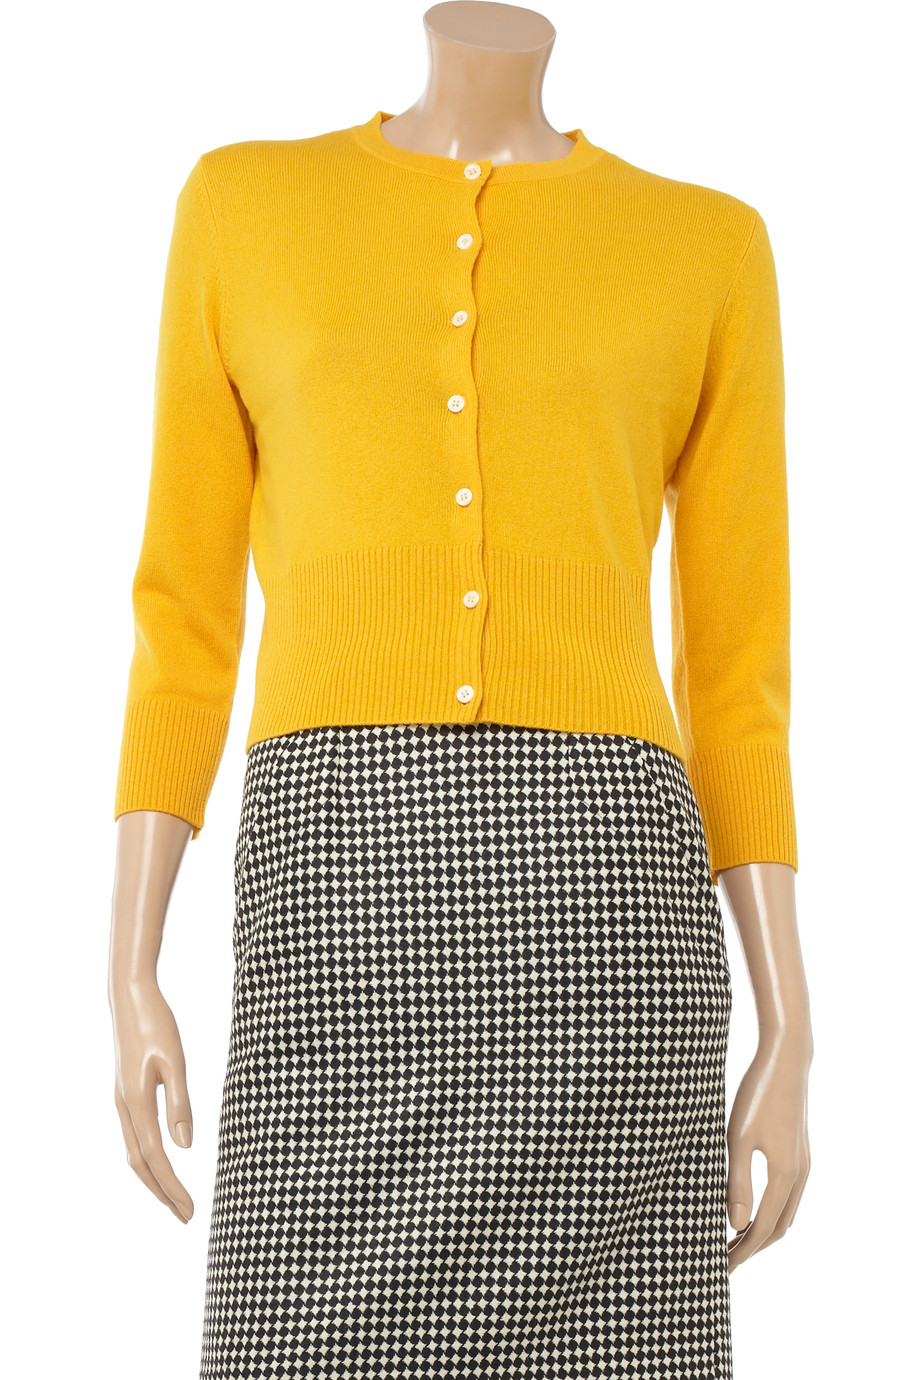 Collection for bright yellow cropped cardigan uk online dress petite size for